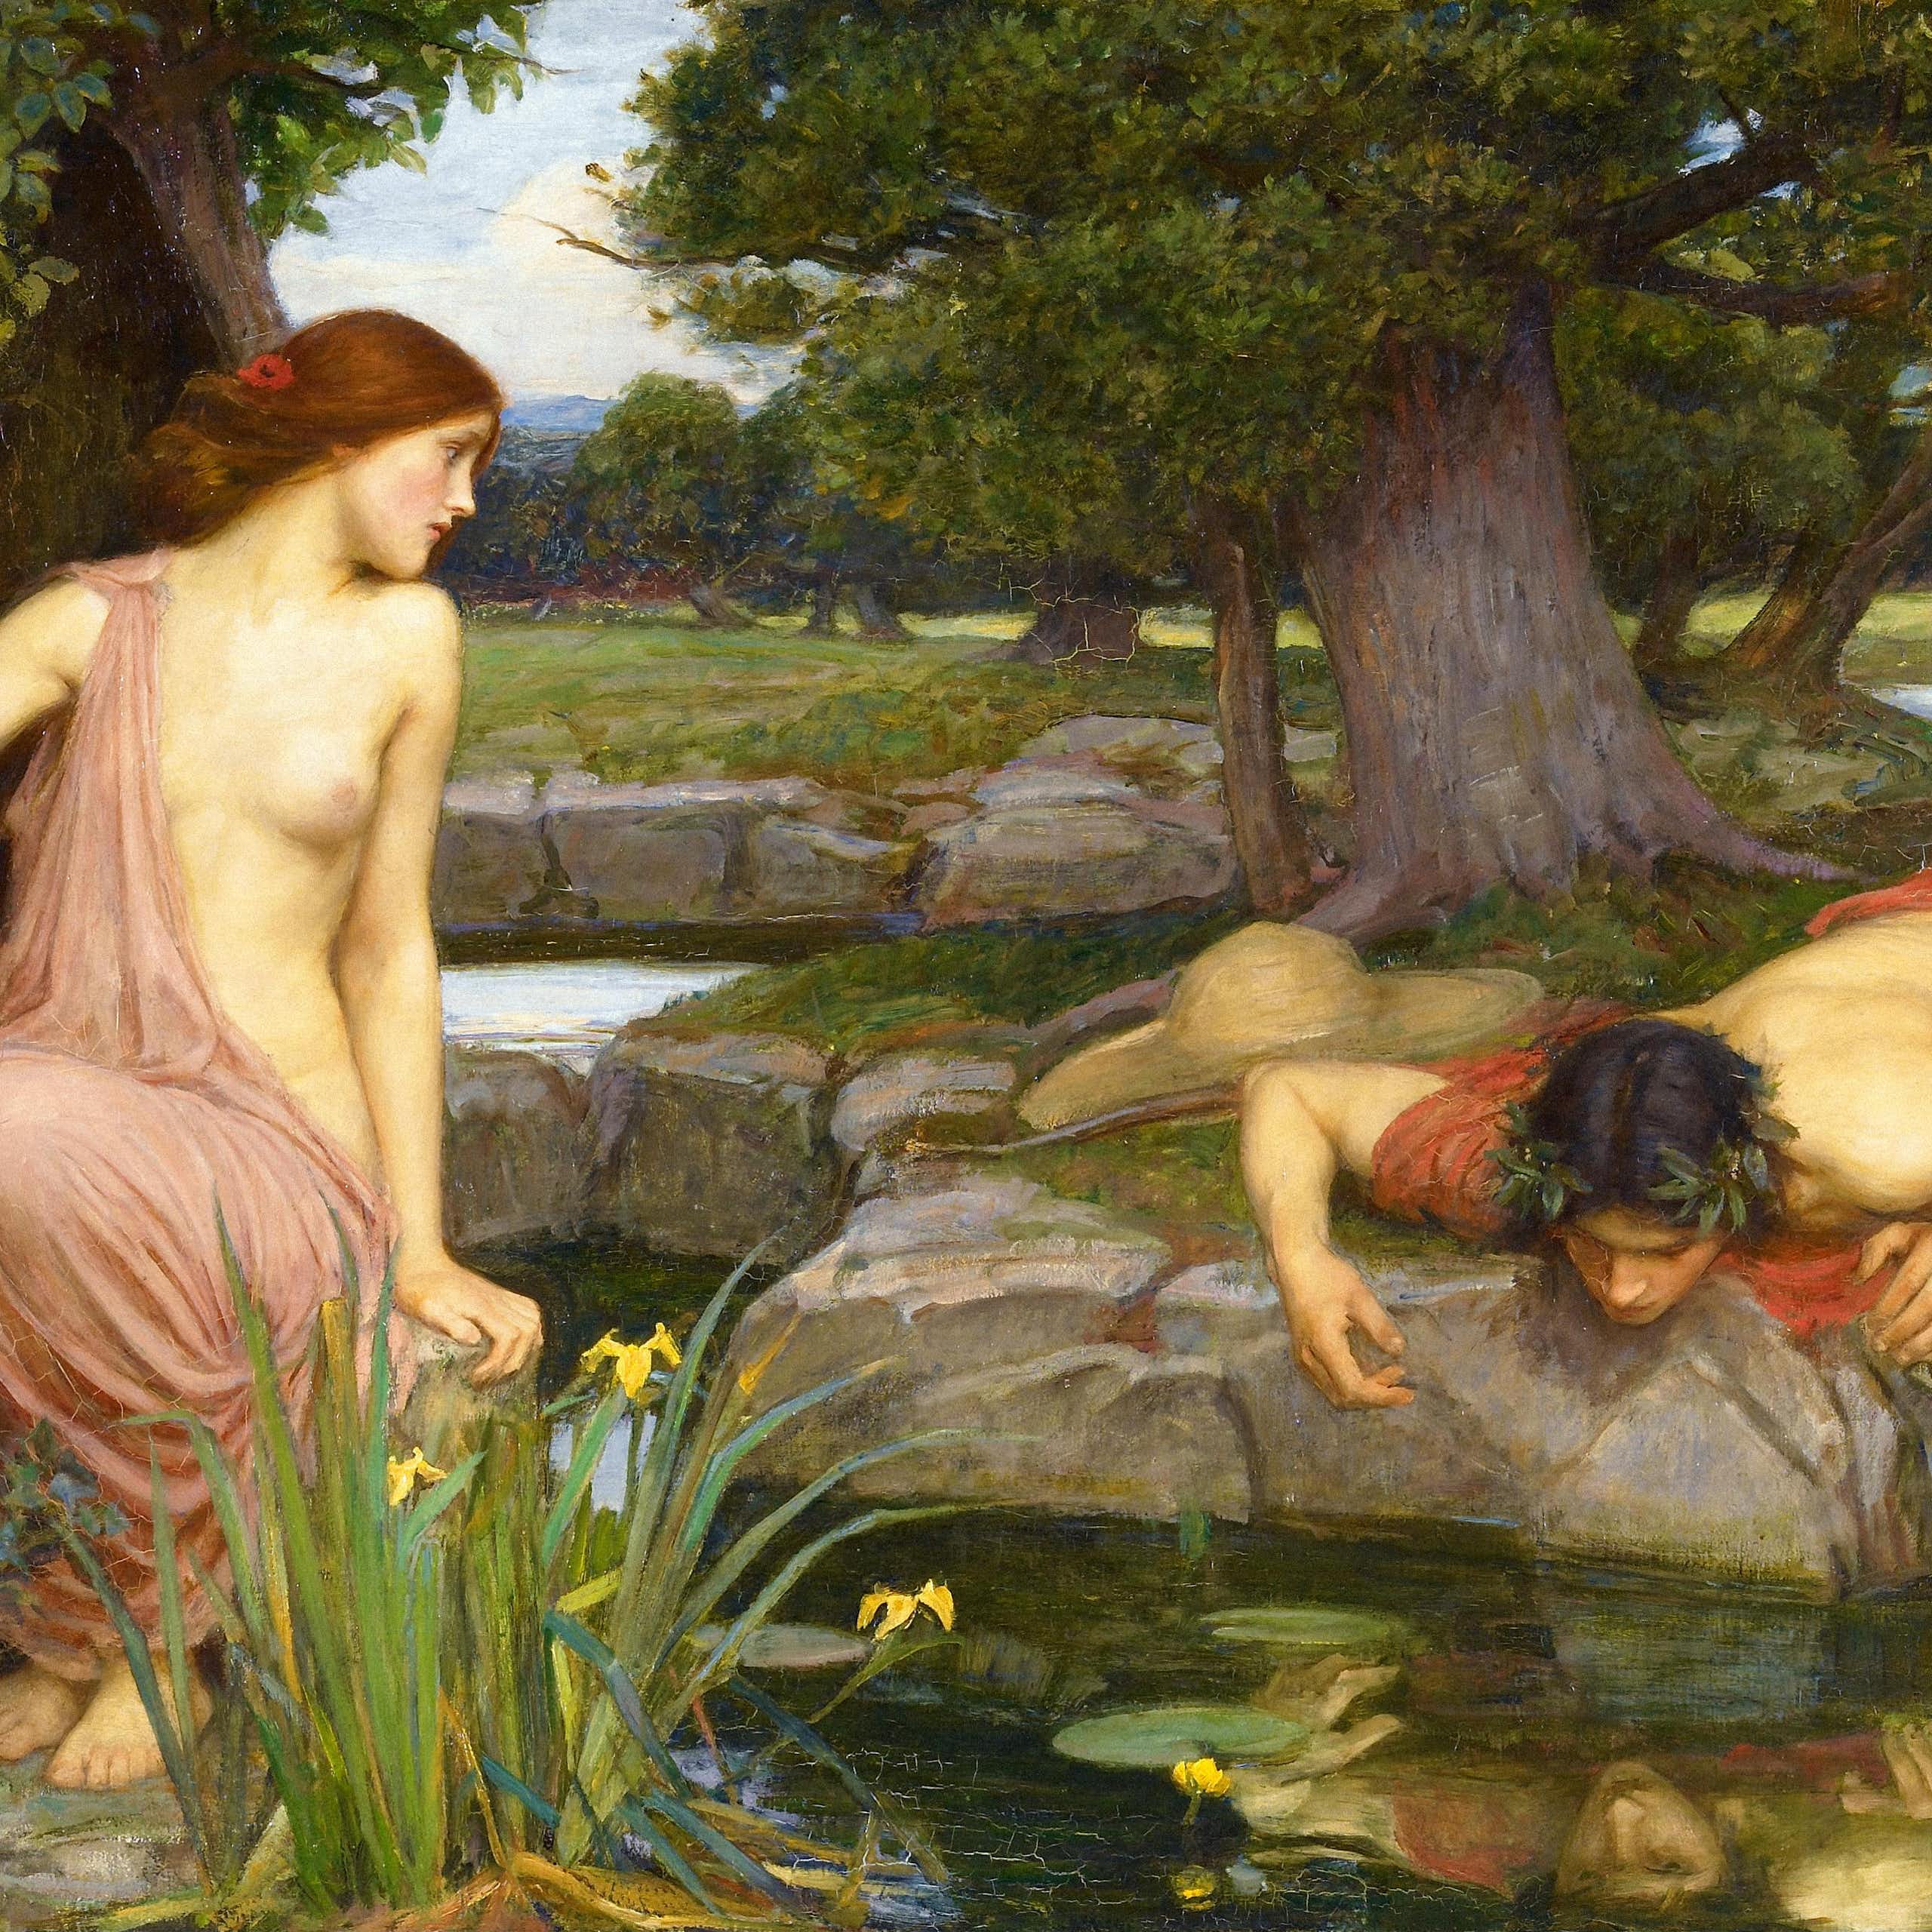 A painting of the Greek myth of Echo and Narcissus